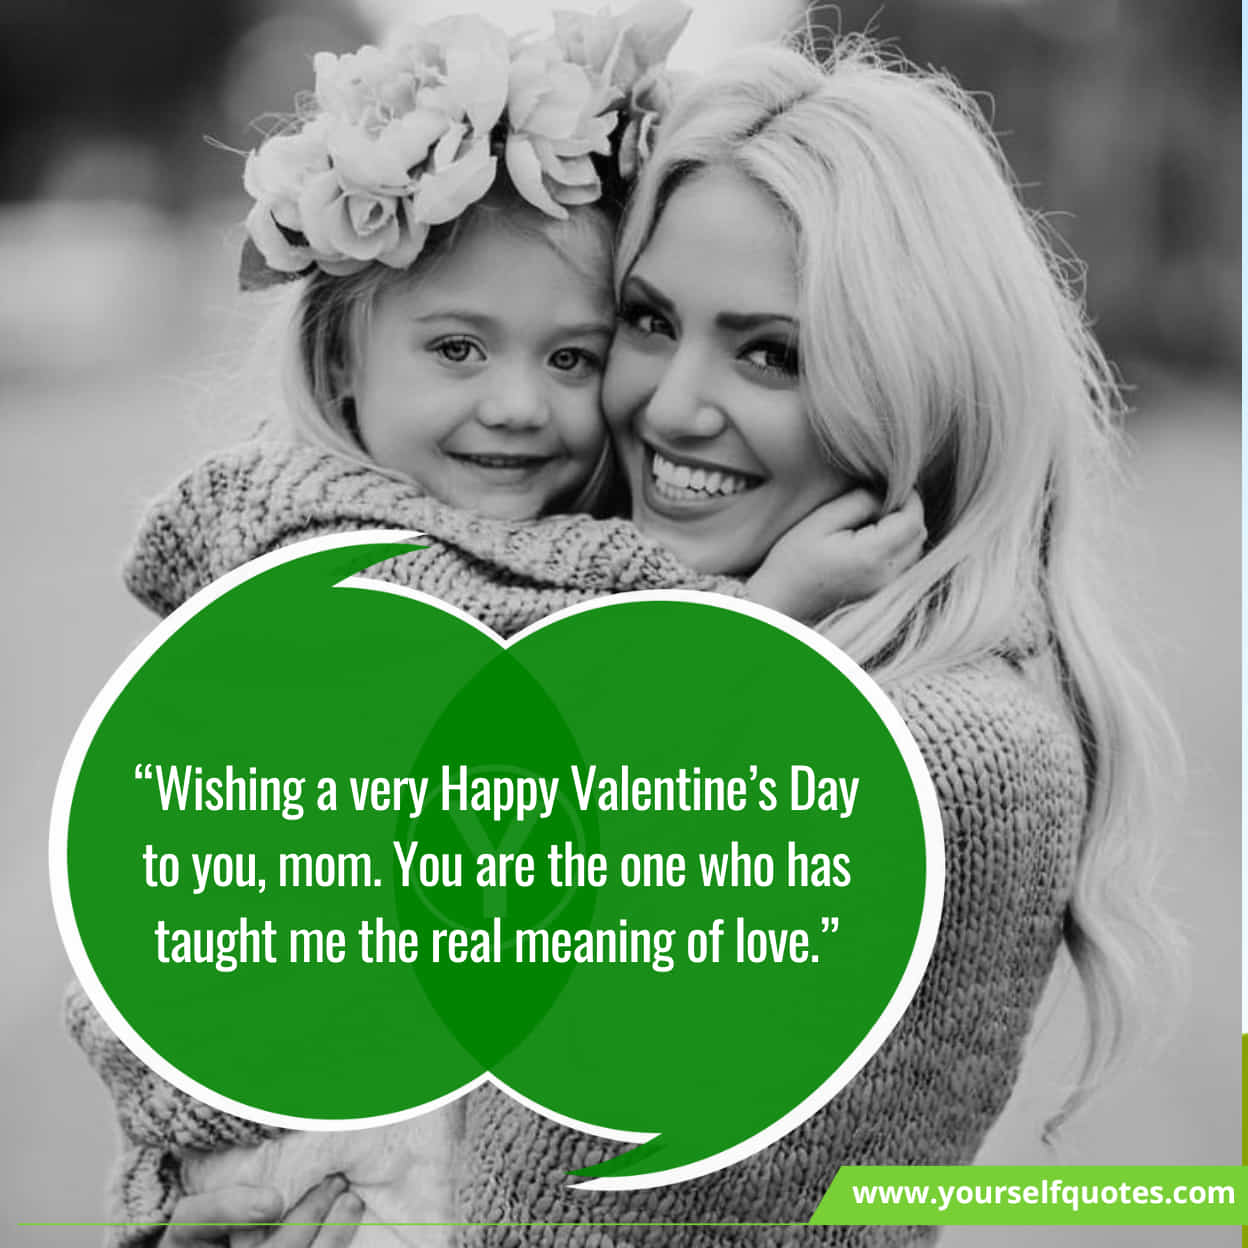 Happy Valentine's Day Messages for Mom